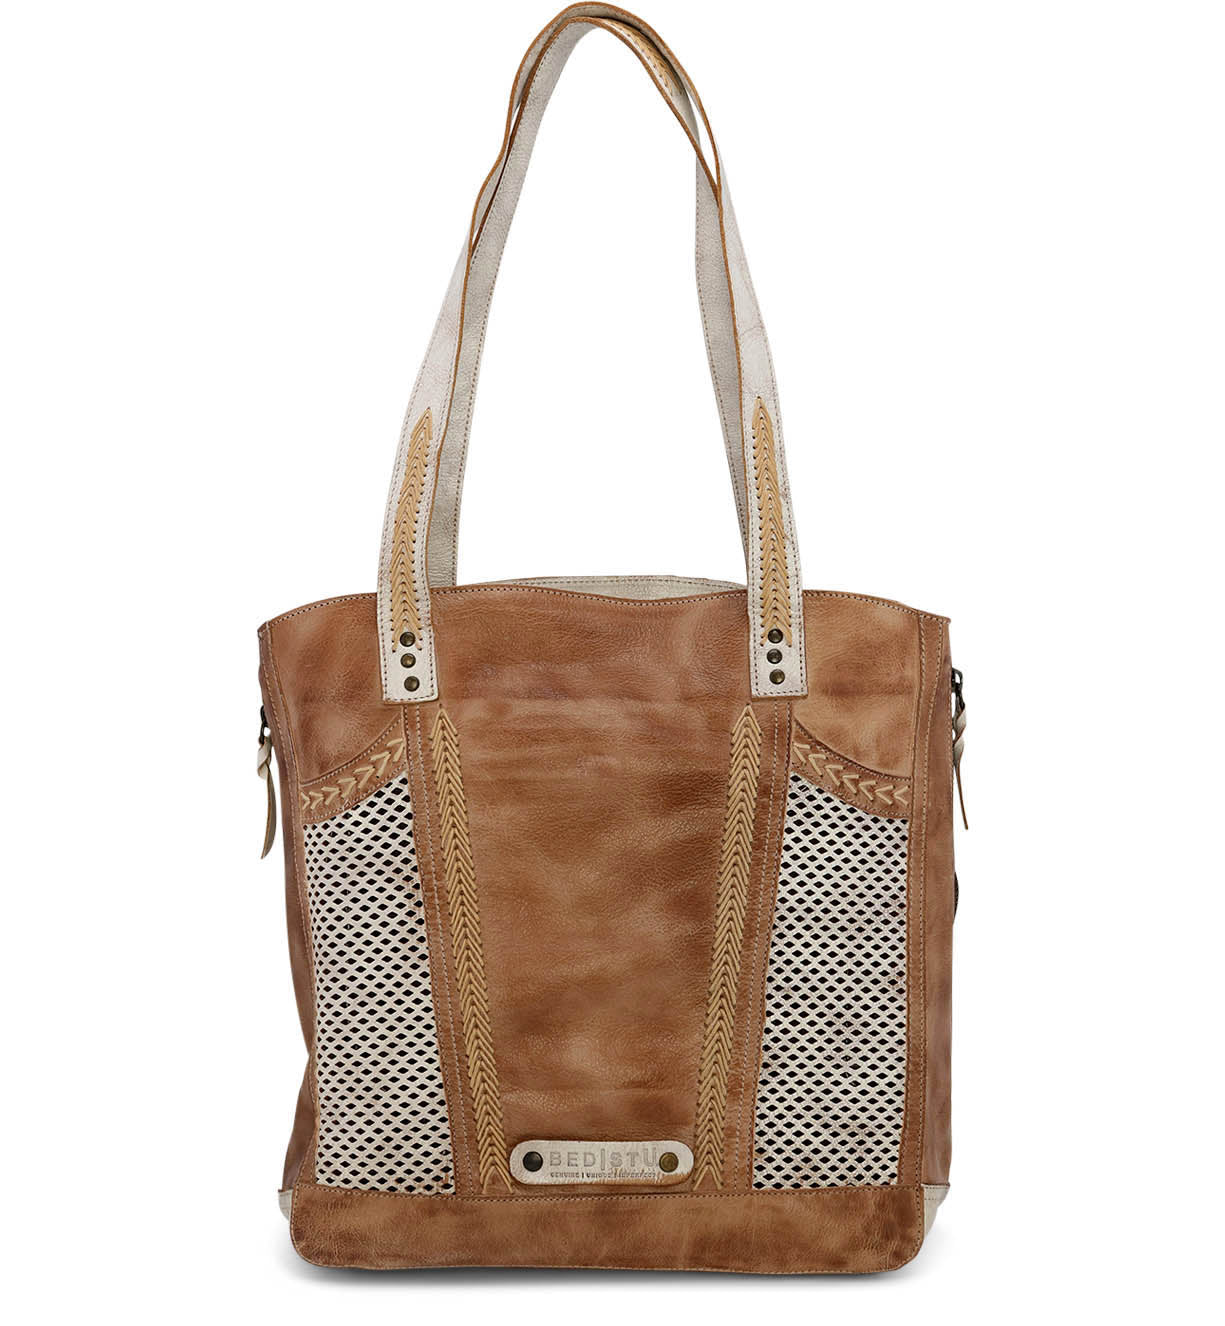 An Amelie leather tote bag from Bed Stu with a mesh pattern.